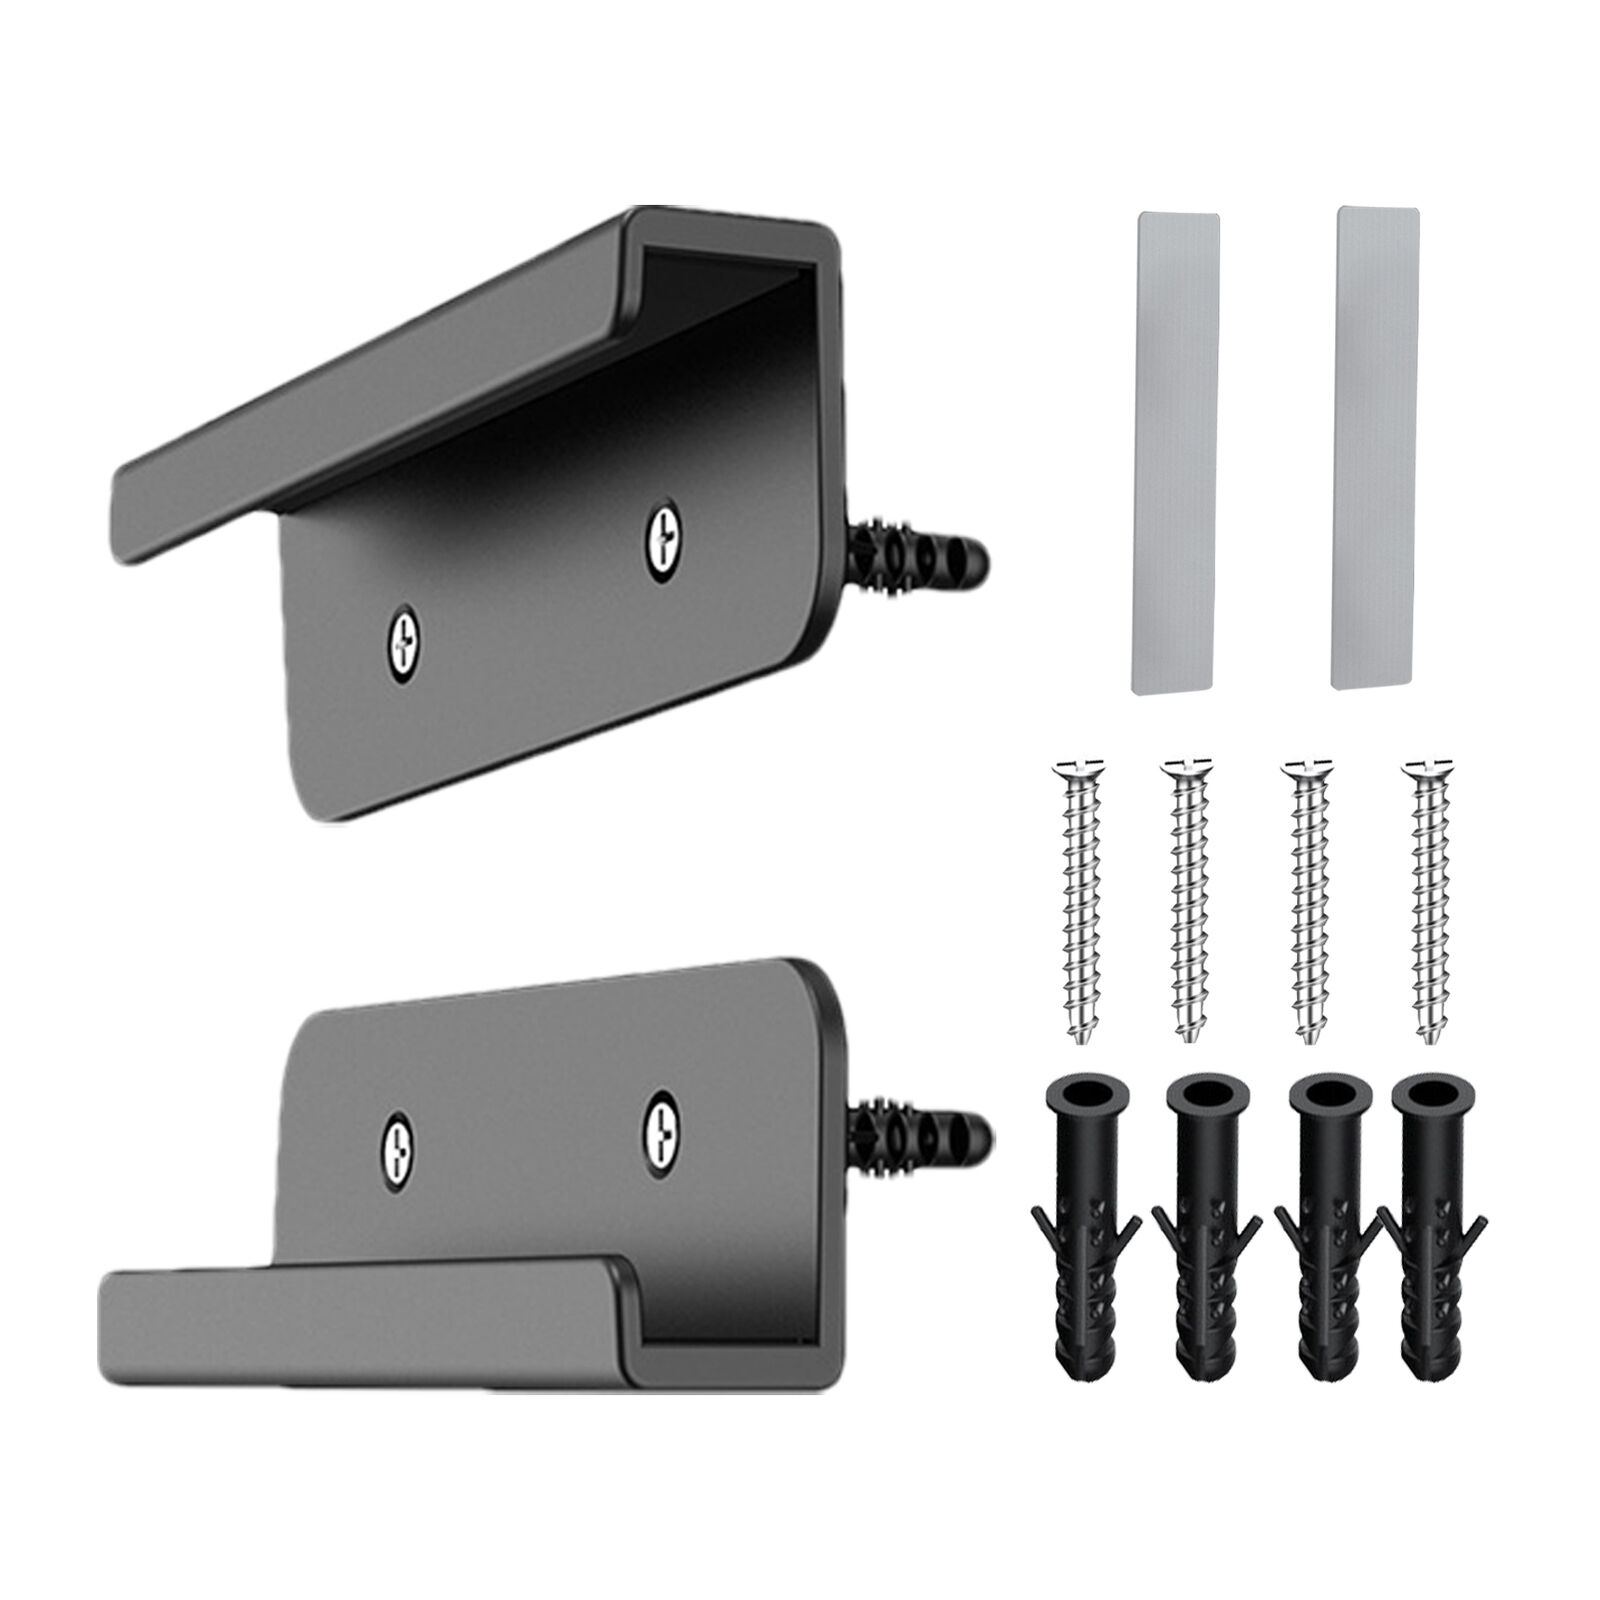 Universal Tablet Wall Mount Fixed Bracket/Holder, For 7